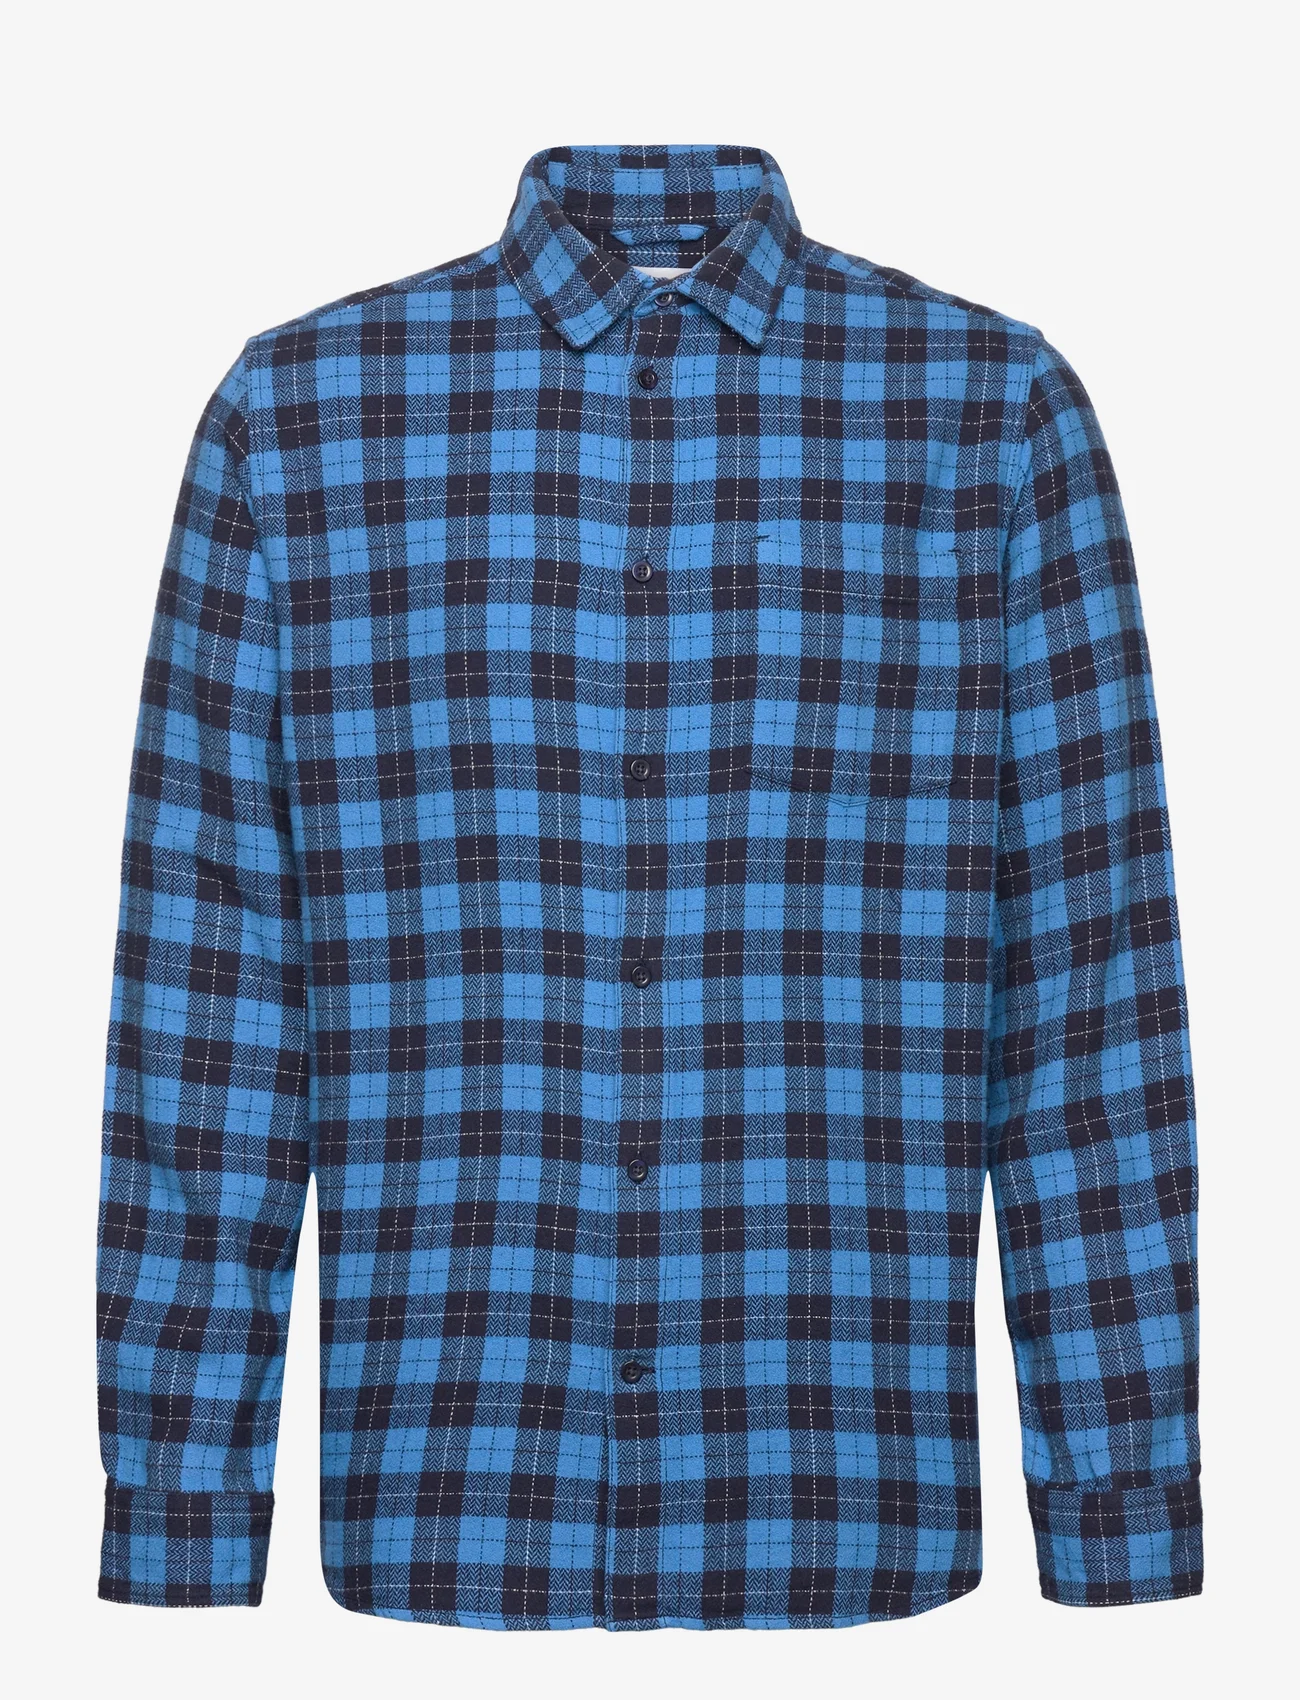 Knowledge Cotton Apparel - Loose fit checkered shirt - GOTS/Ve - casual hemden - blue check - 0